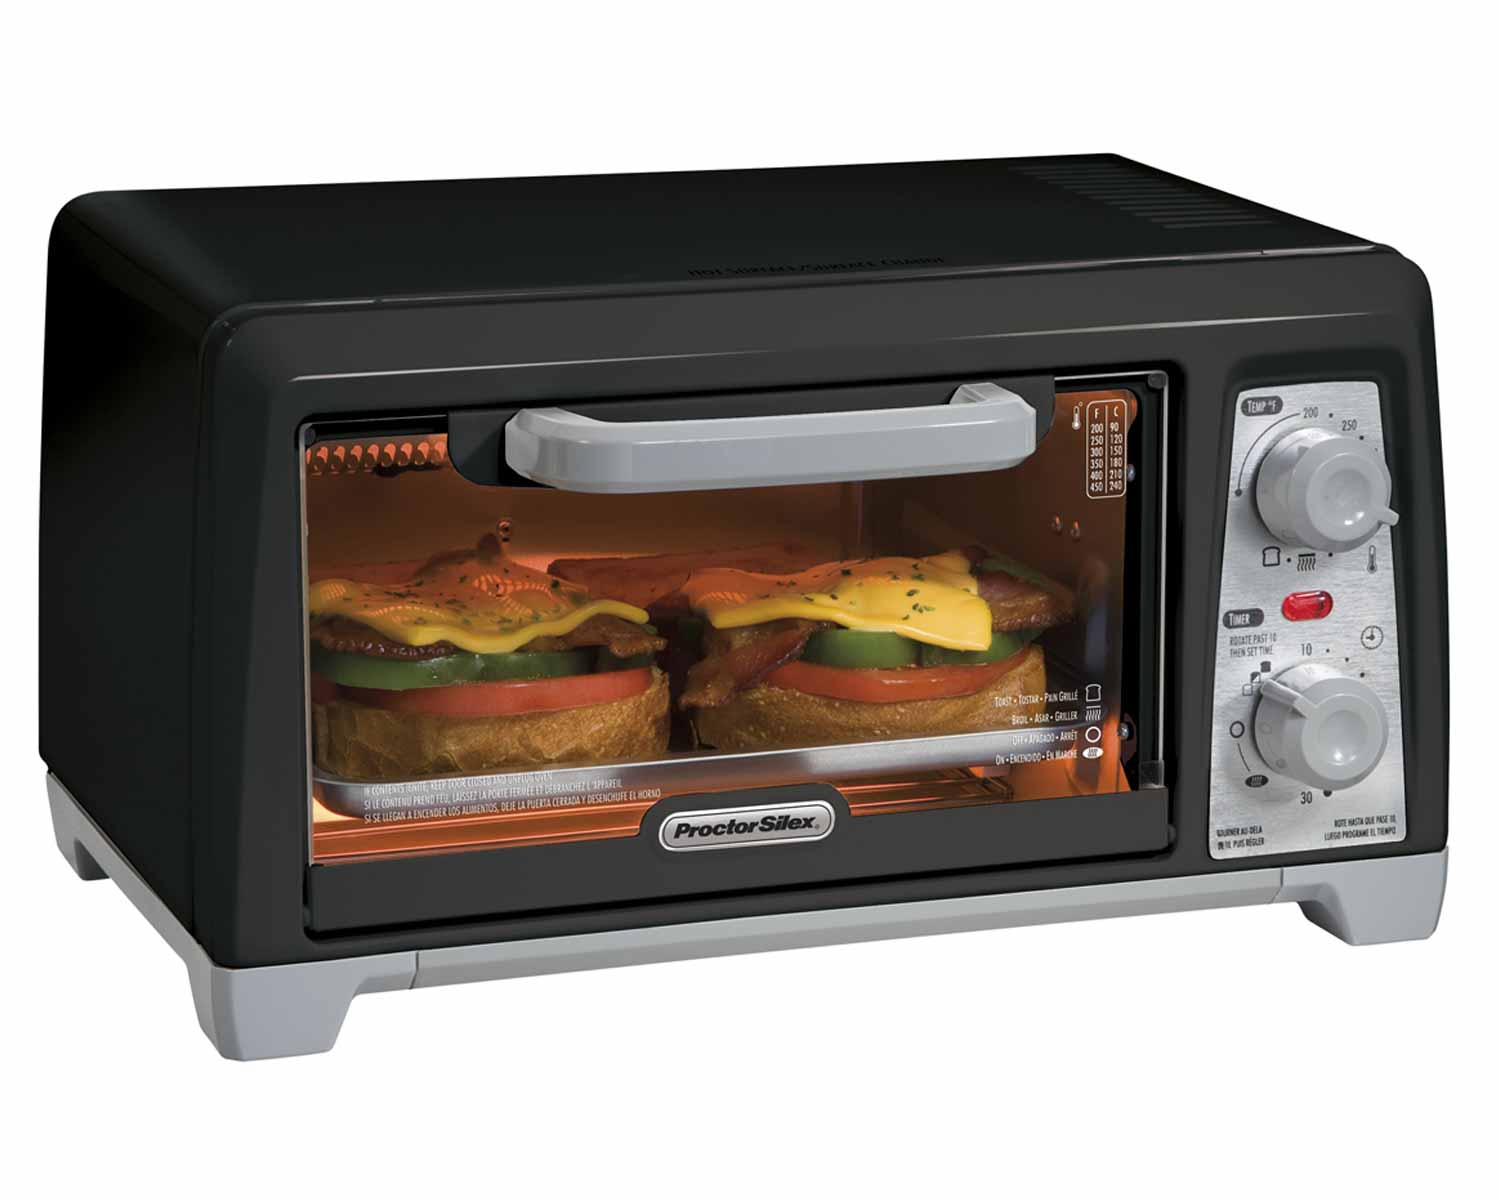 Toaster Oven (black)